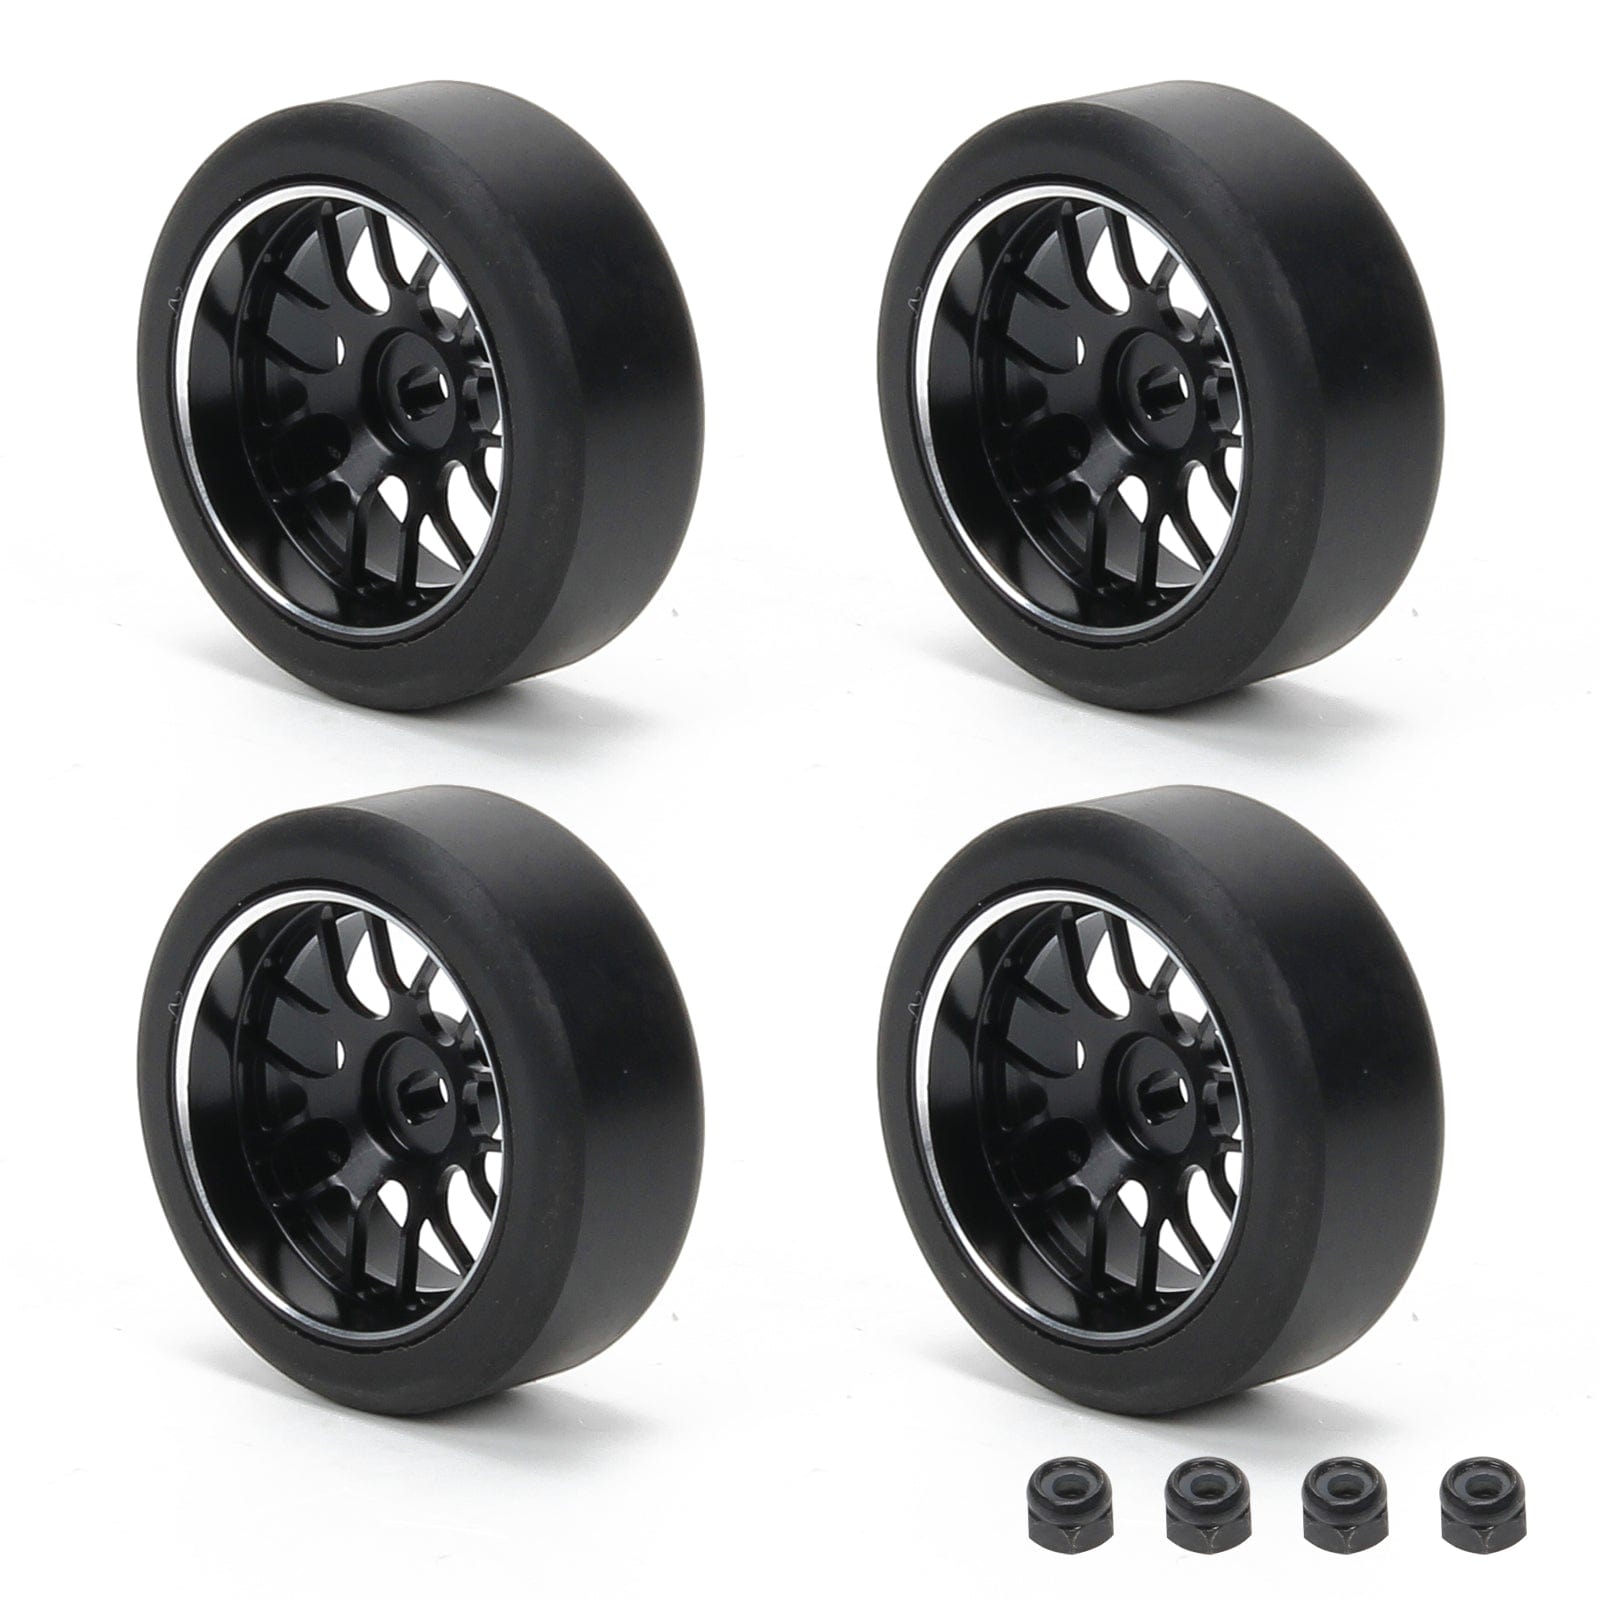 RCAWD WLTOYS K969 K989 P929 RCAWD Wltoys Upgrades 29mm Reticulation Drift Wheel Tires for 1/28 Wltoys K969 K989 P929